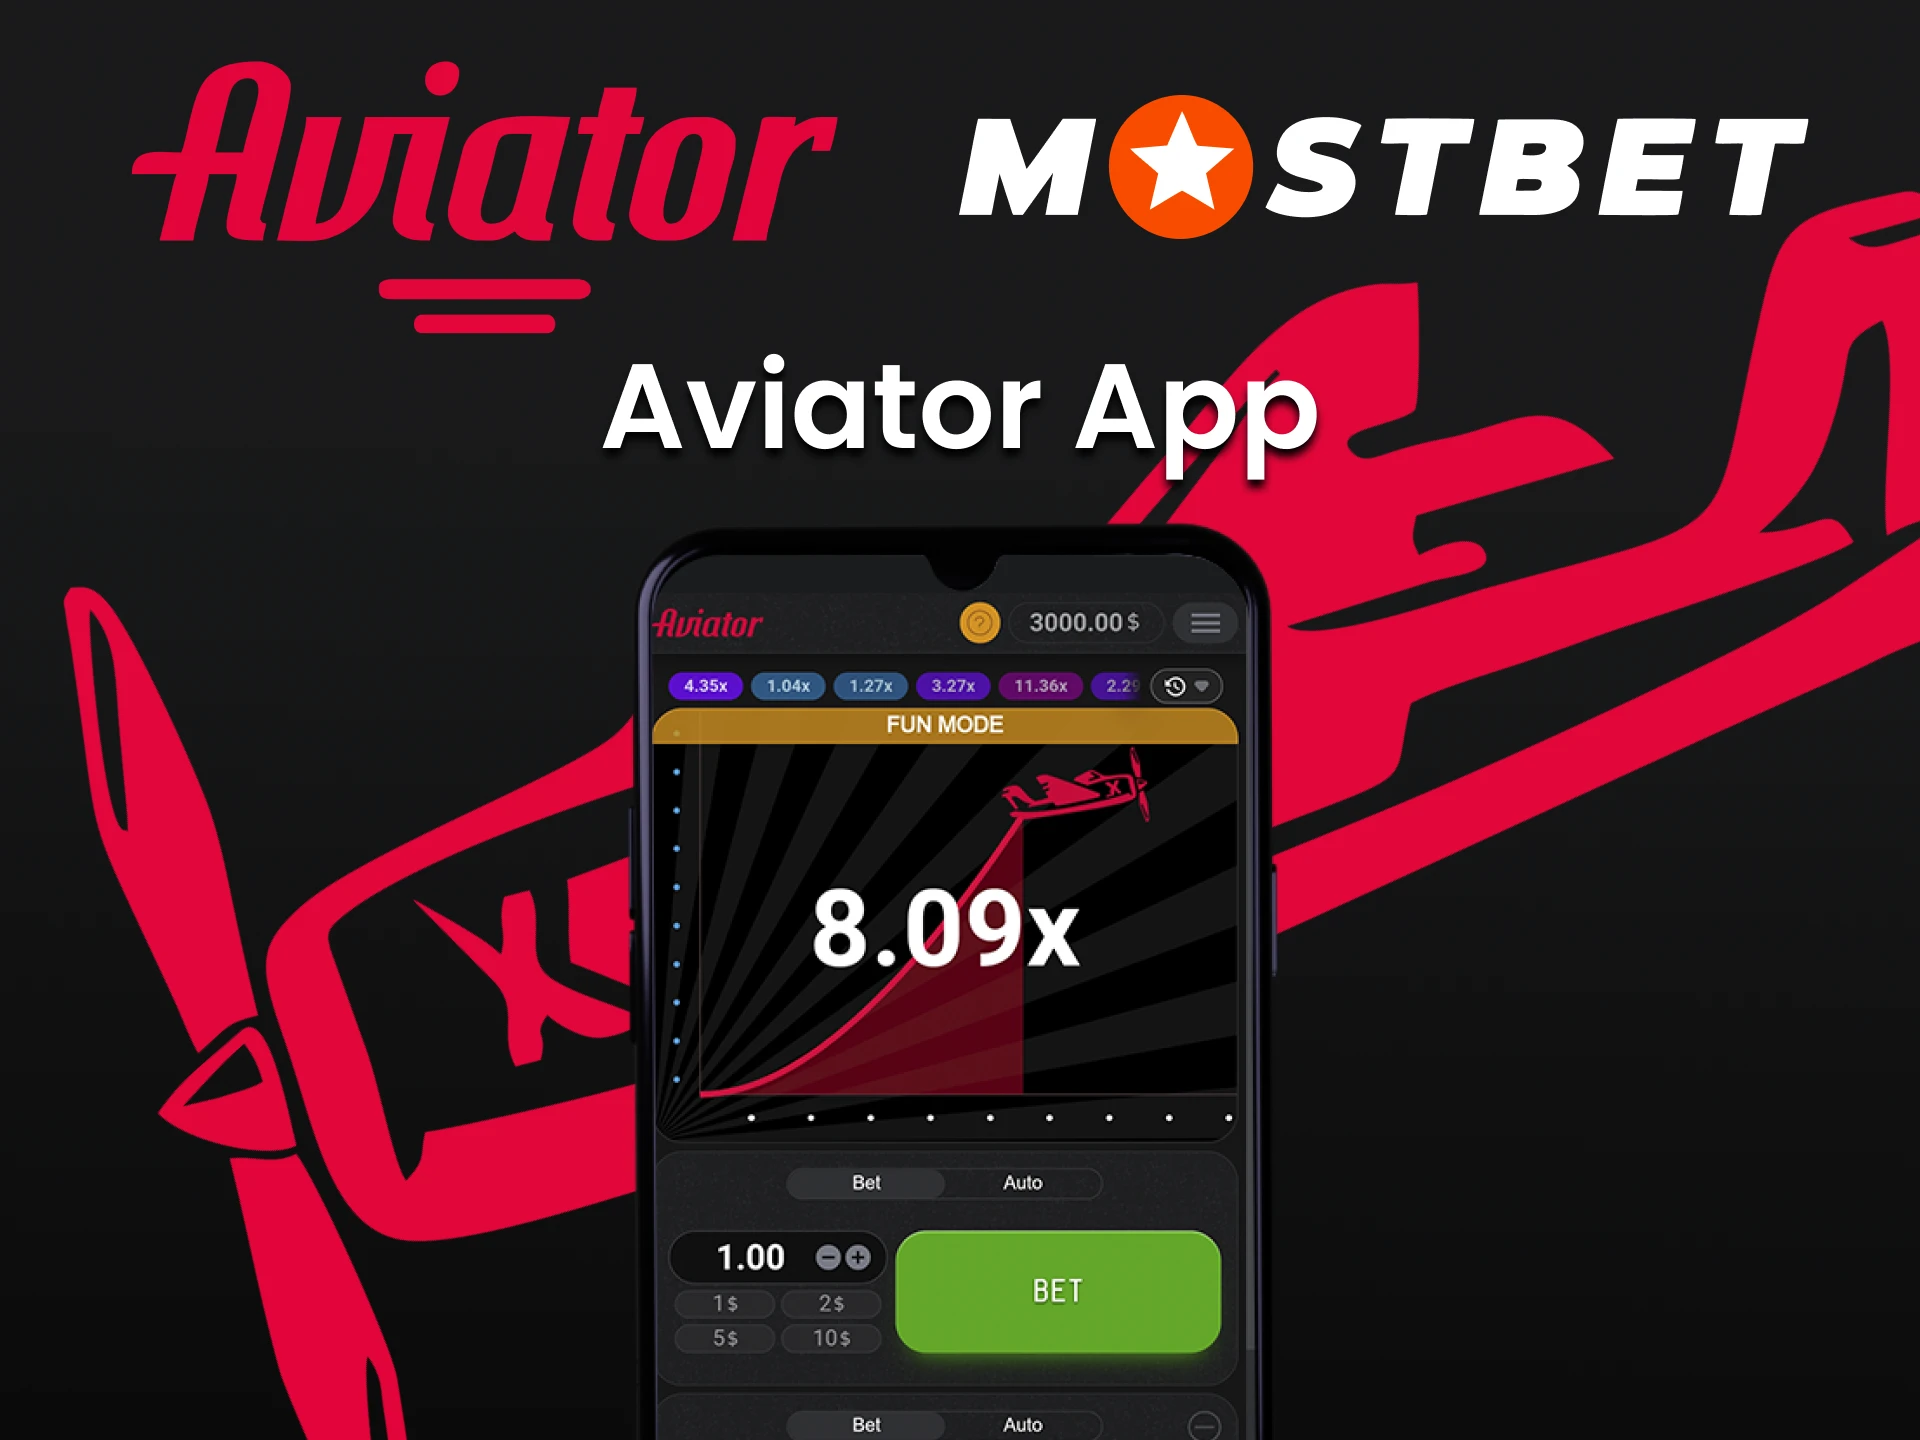 Play the Aviator game with the Mostbet app.